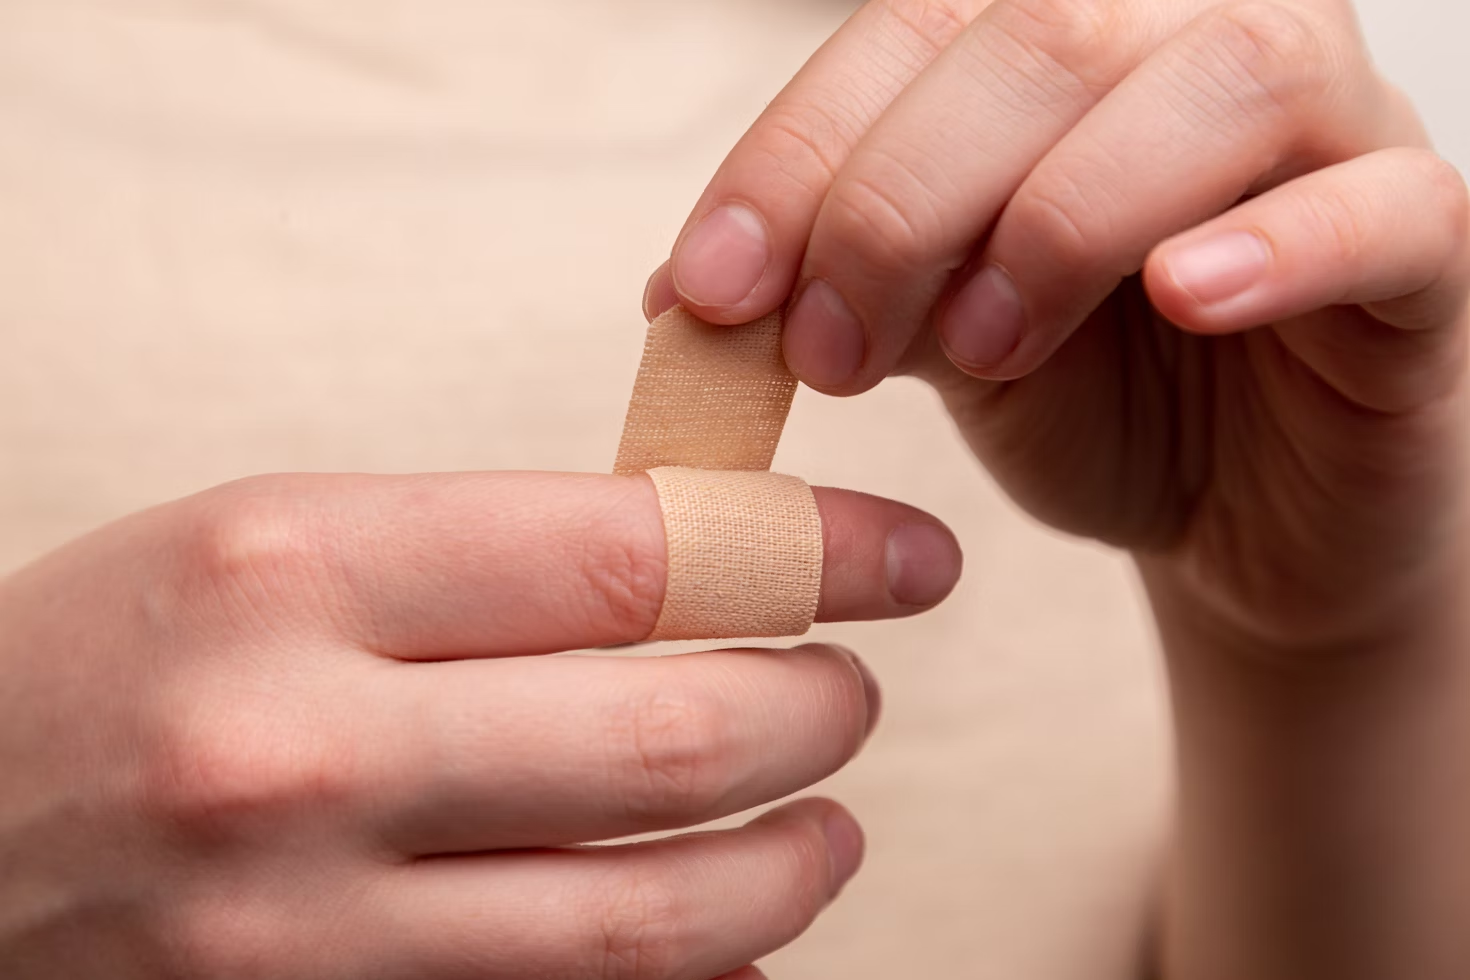  A person putting on a bandage